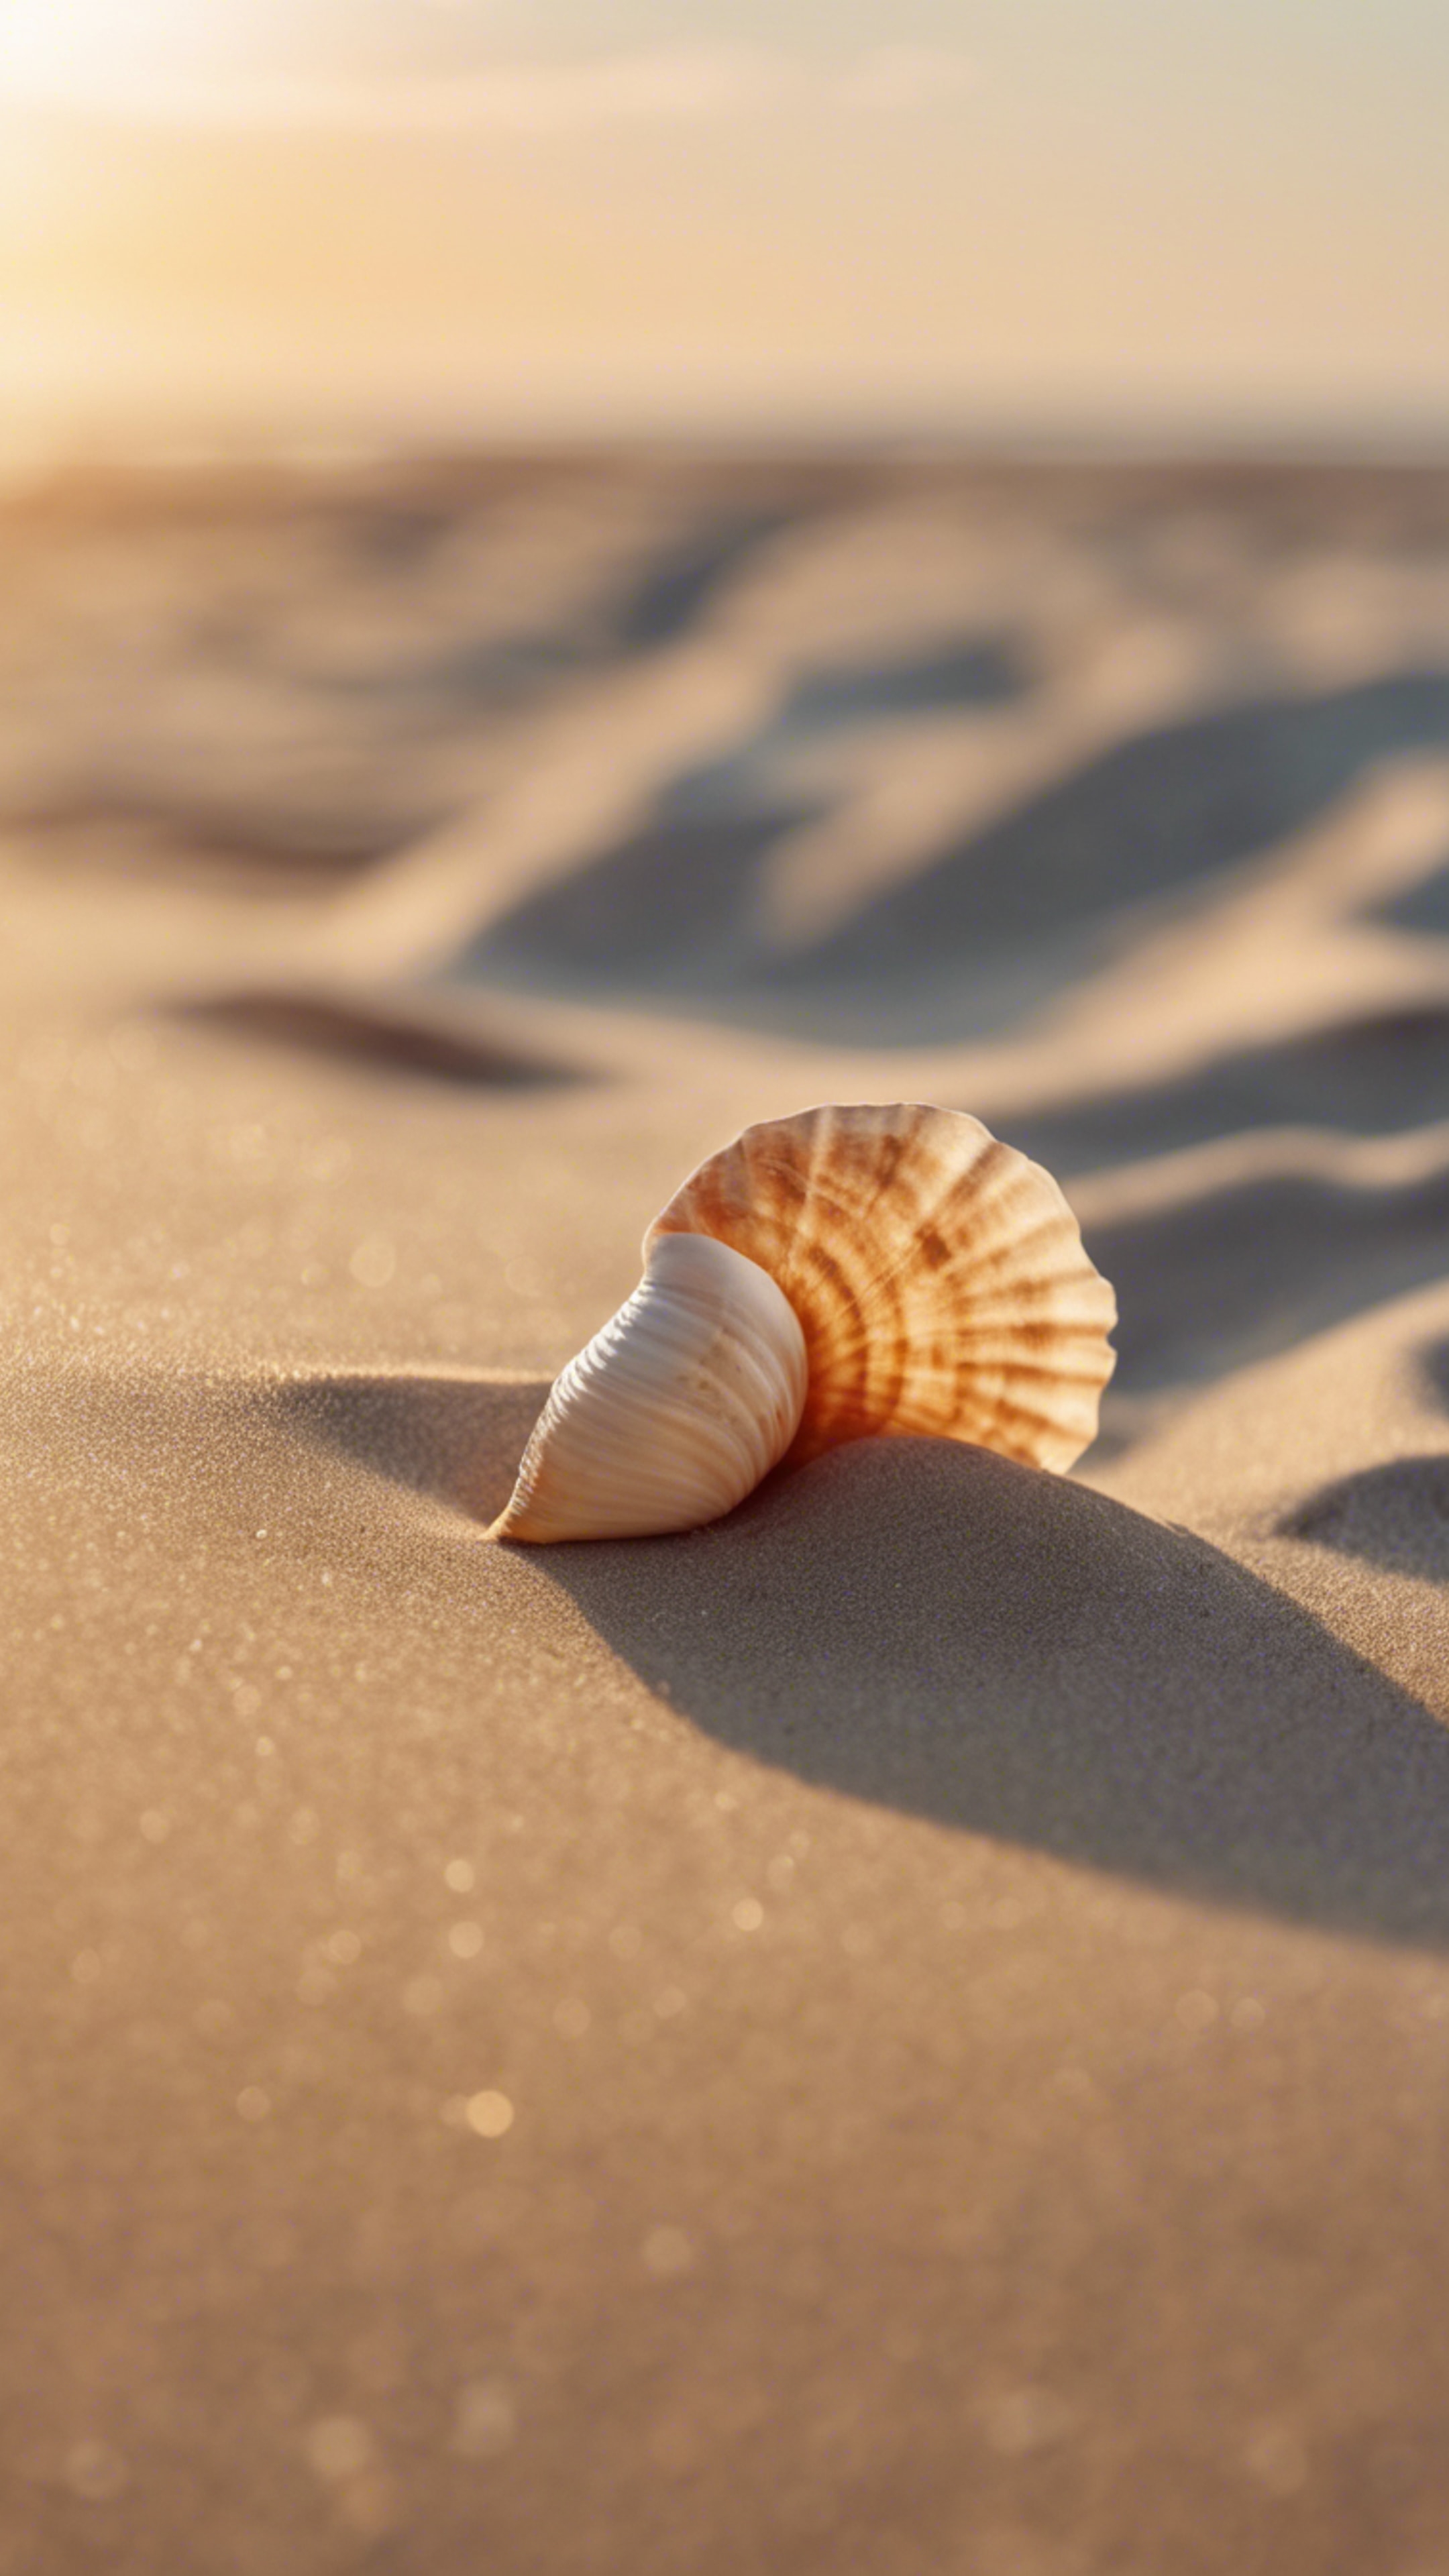 A sandy beach at sunrise, with a lonely seashell on the smooth, cool beige sand. Tapet[f397365f3b8642f18a02]